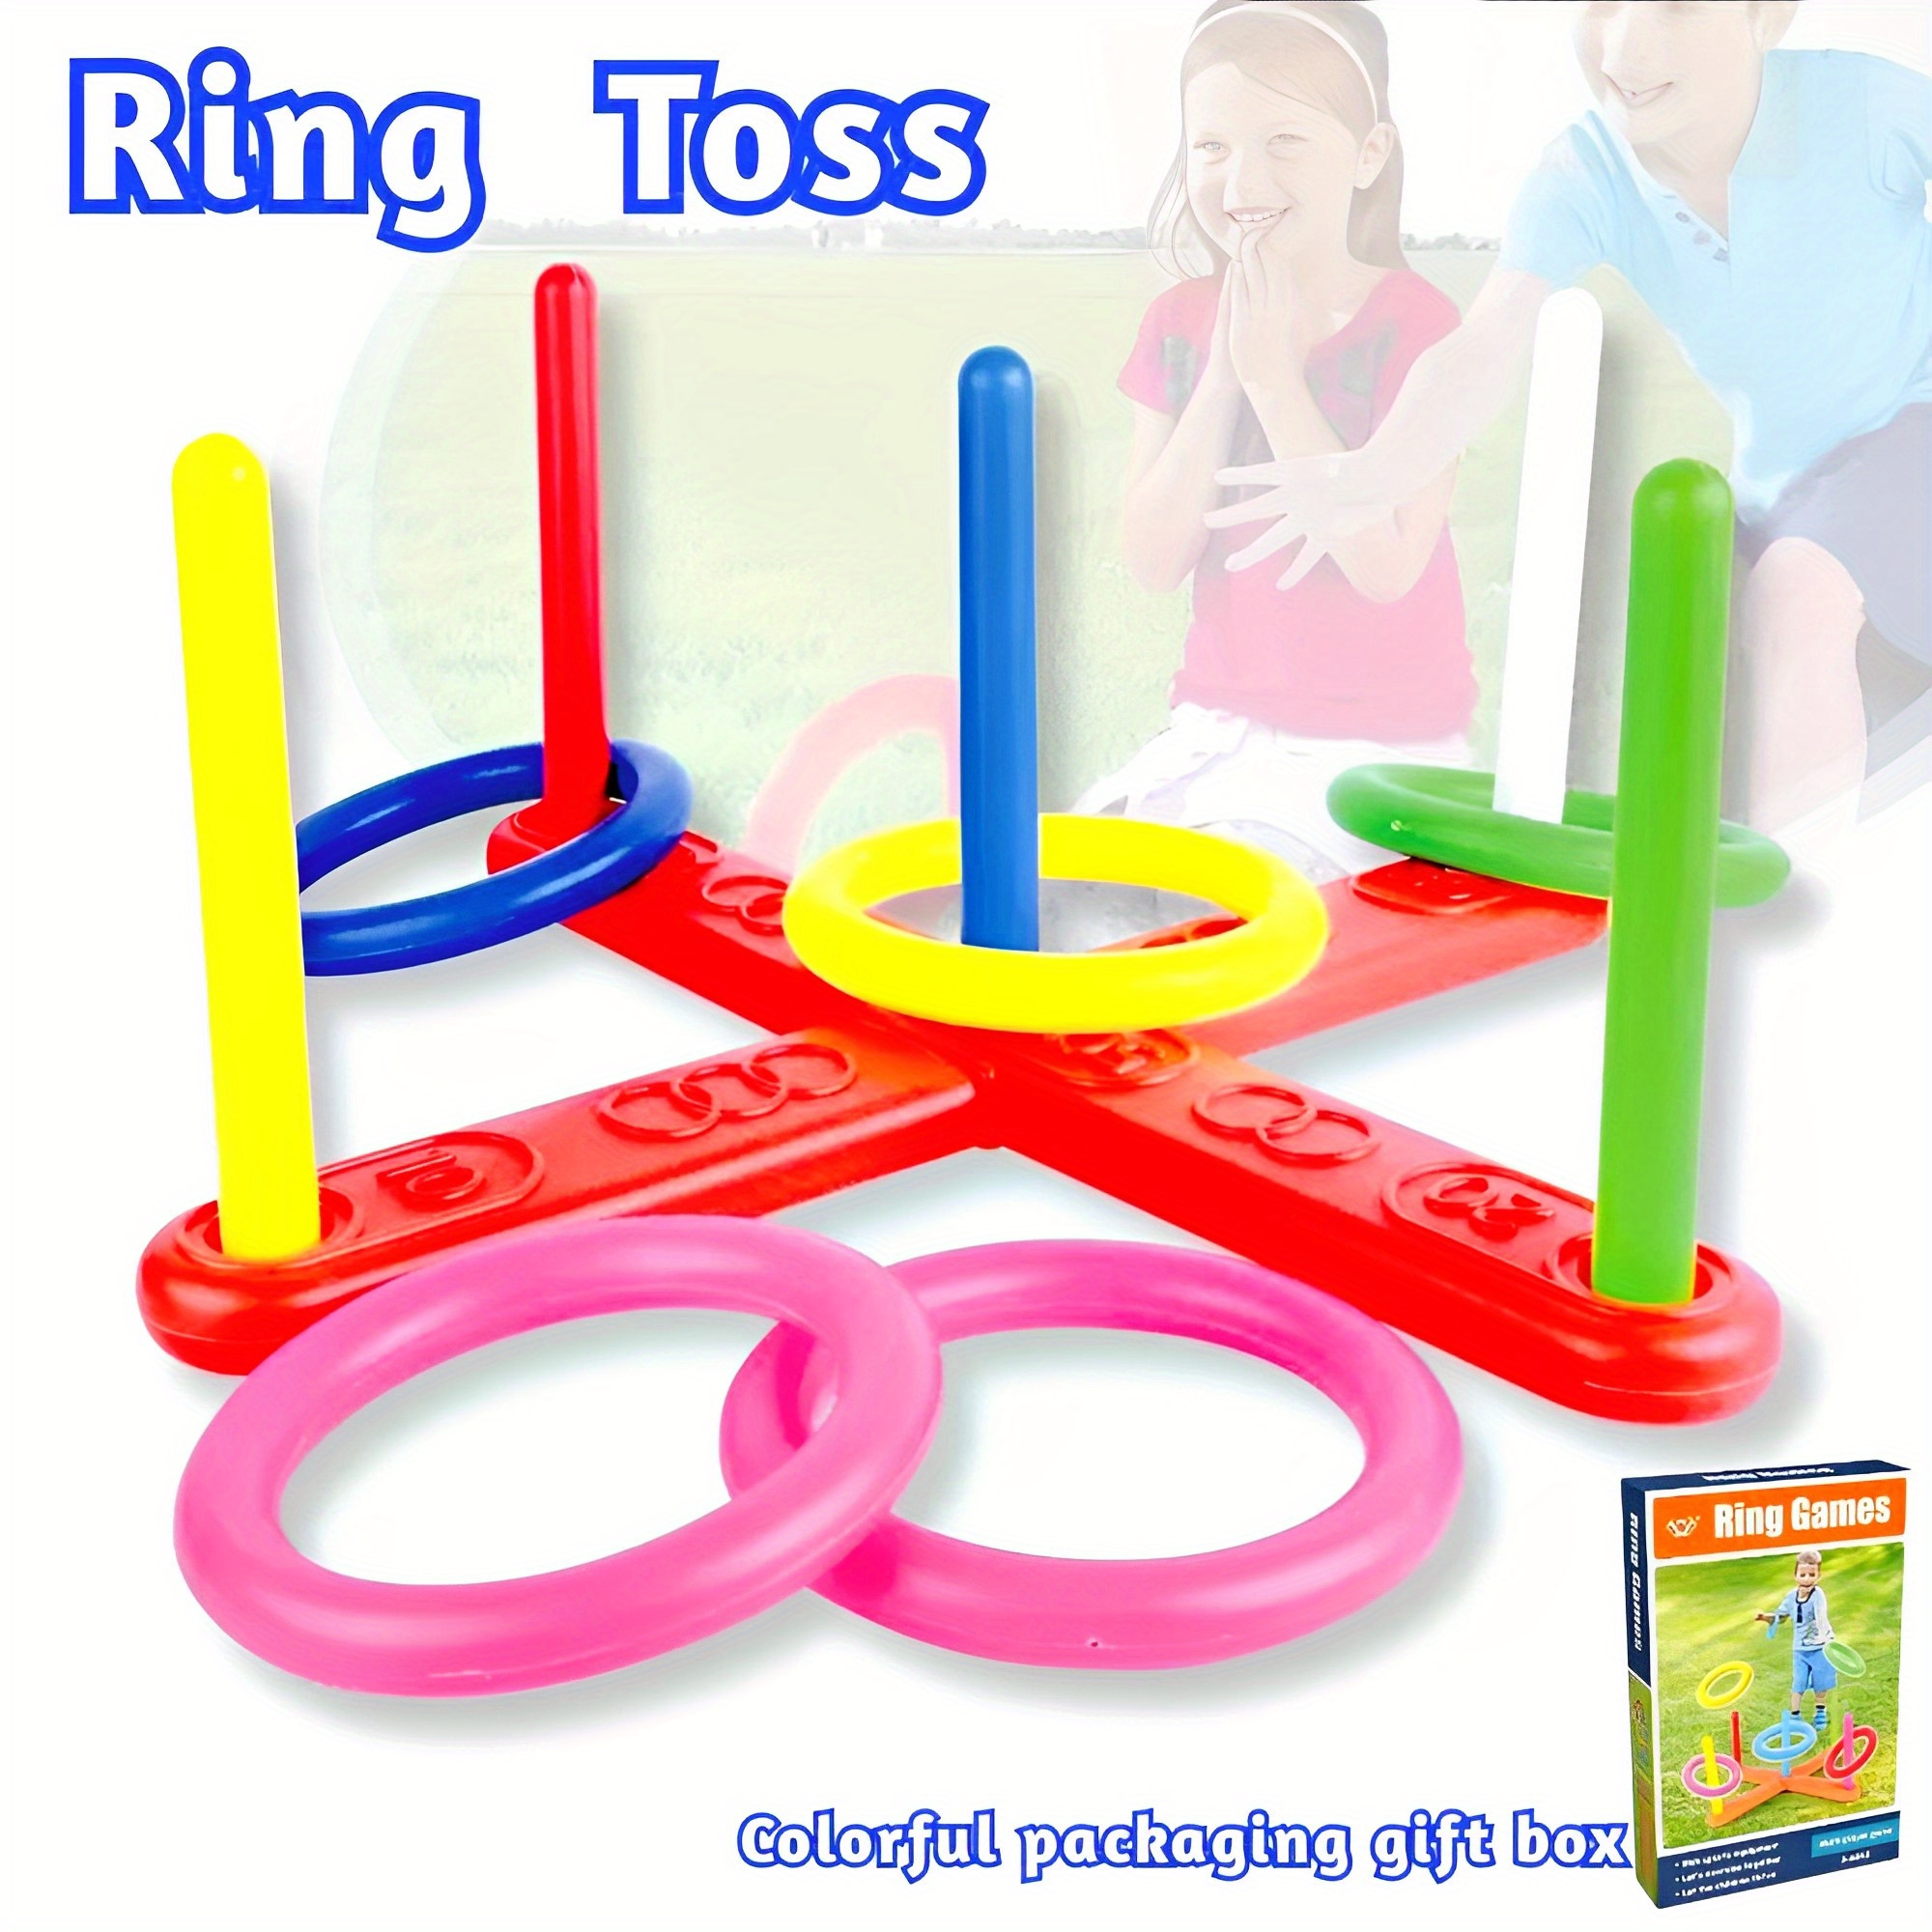 24 PCS Plastic Toss Rings,Ring Toss Game for Kids,Outdoor Toss Rings for  Speed and Agility Practice Training Games,Multicolor Training Rings  Carnival